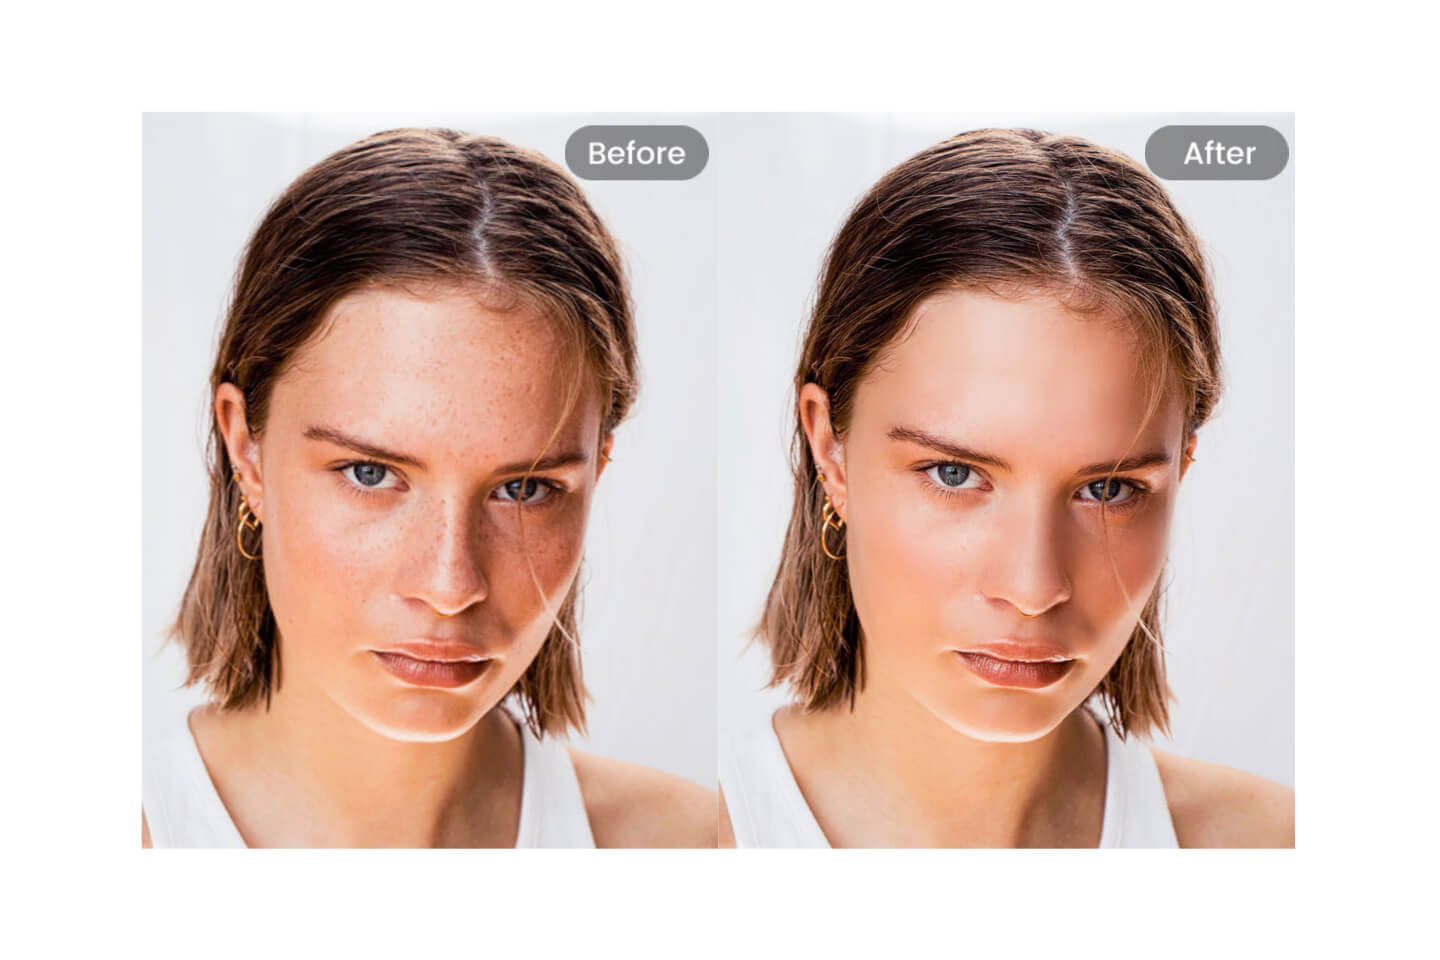 Before and after photos of retouching with Fotor